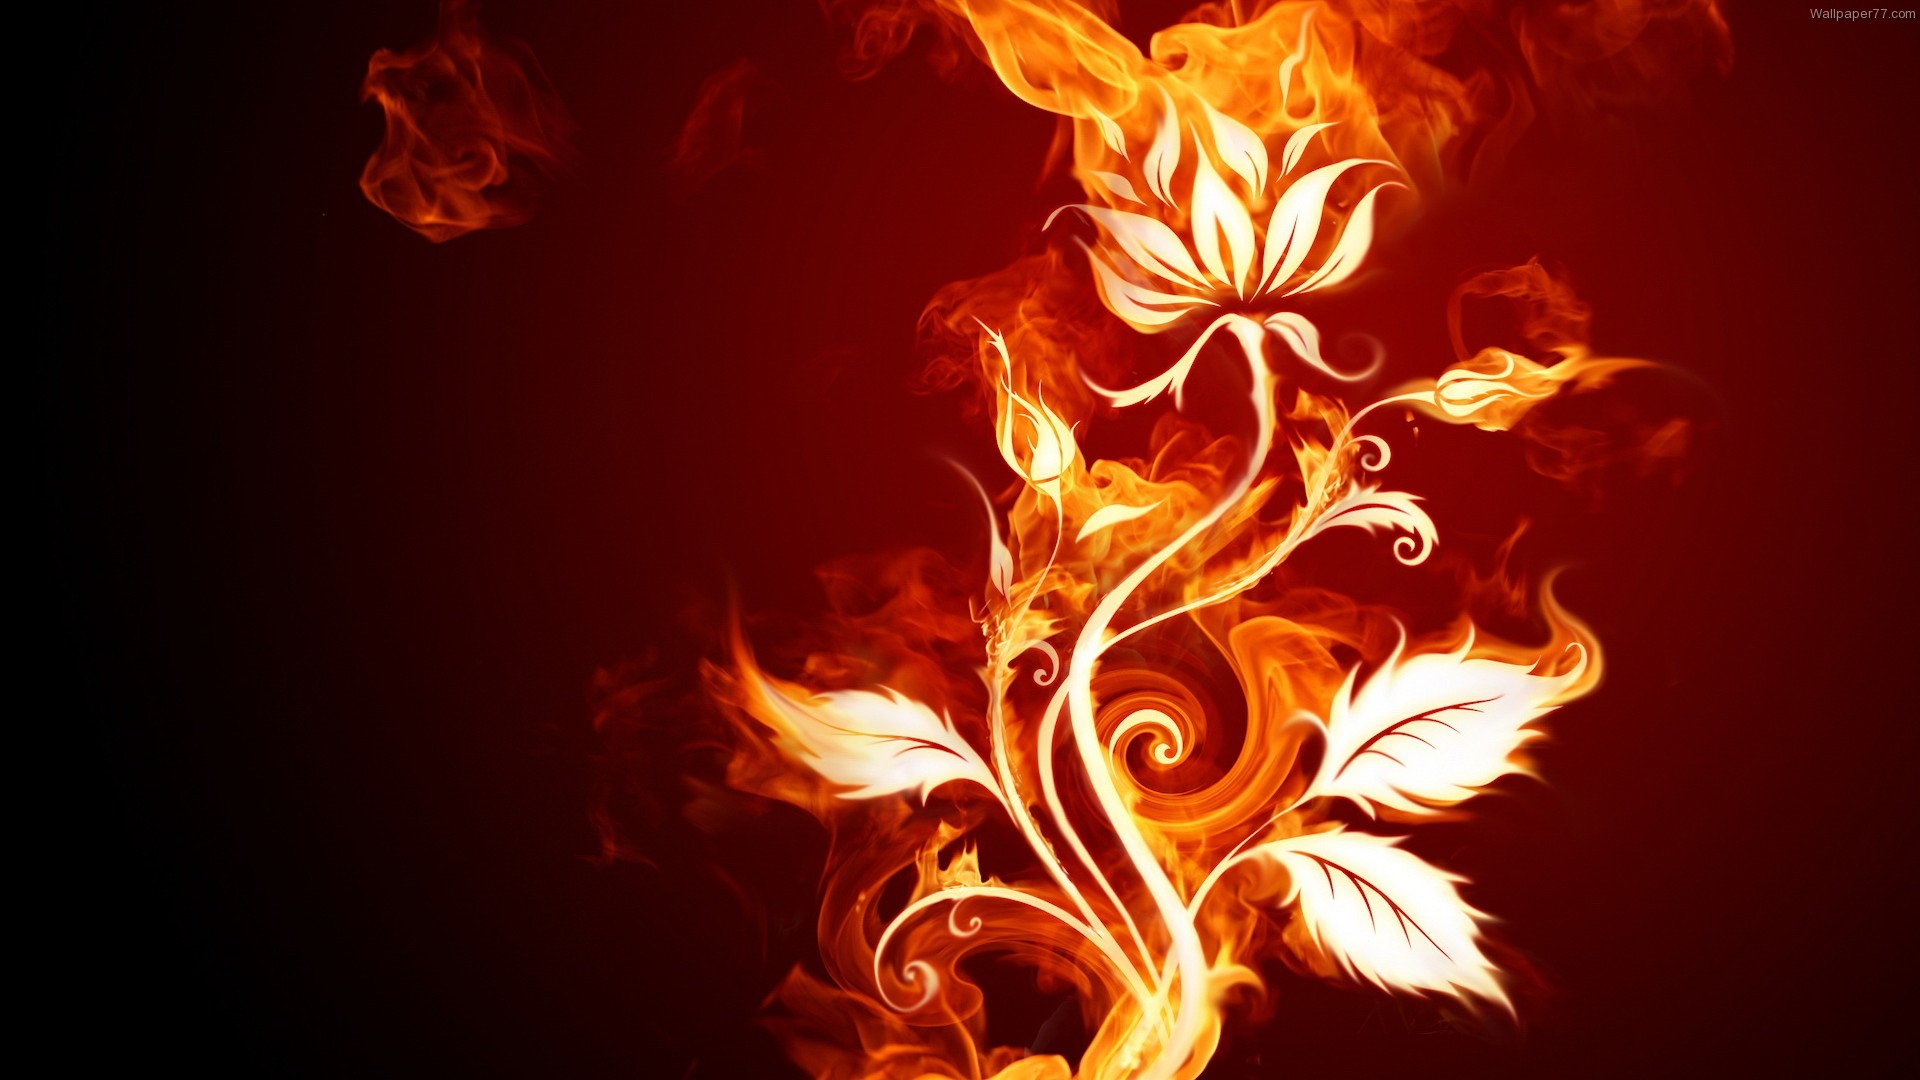 Flower fire abstract desktop wallpaper with resolutions 19201080 px